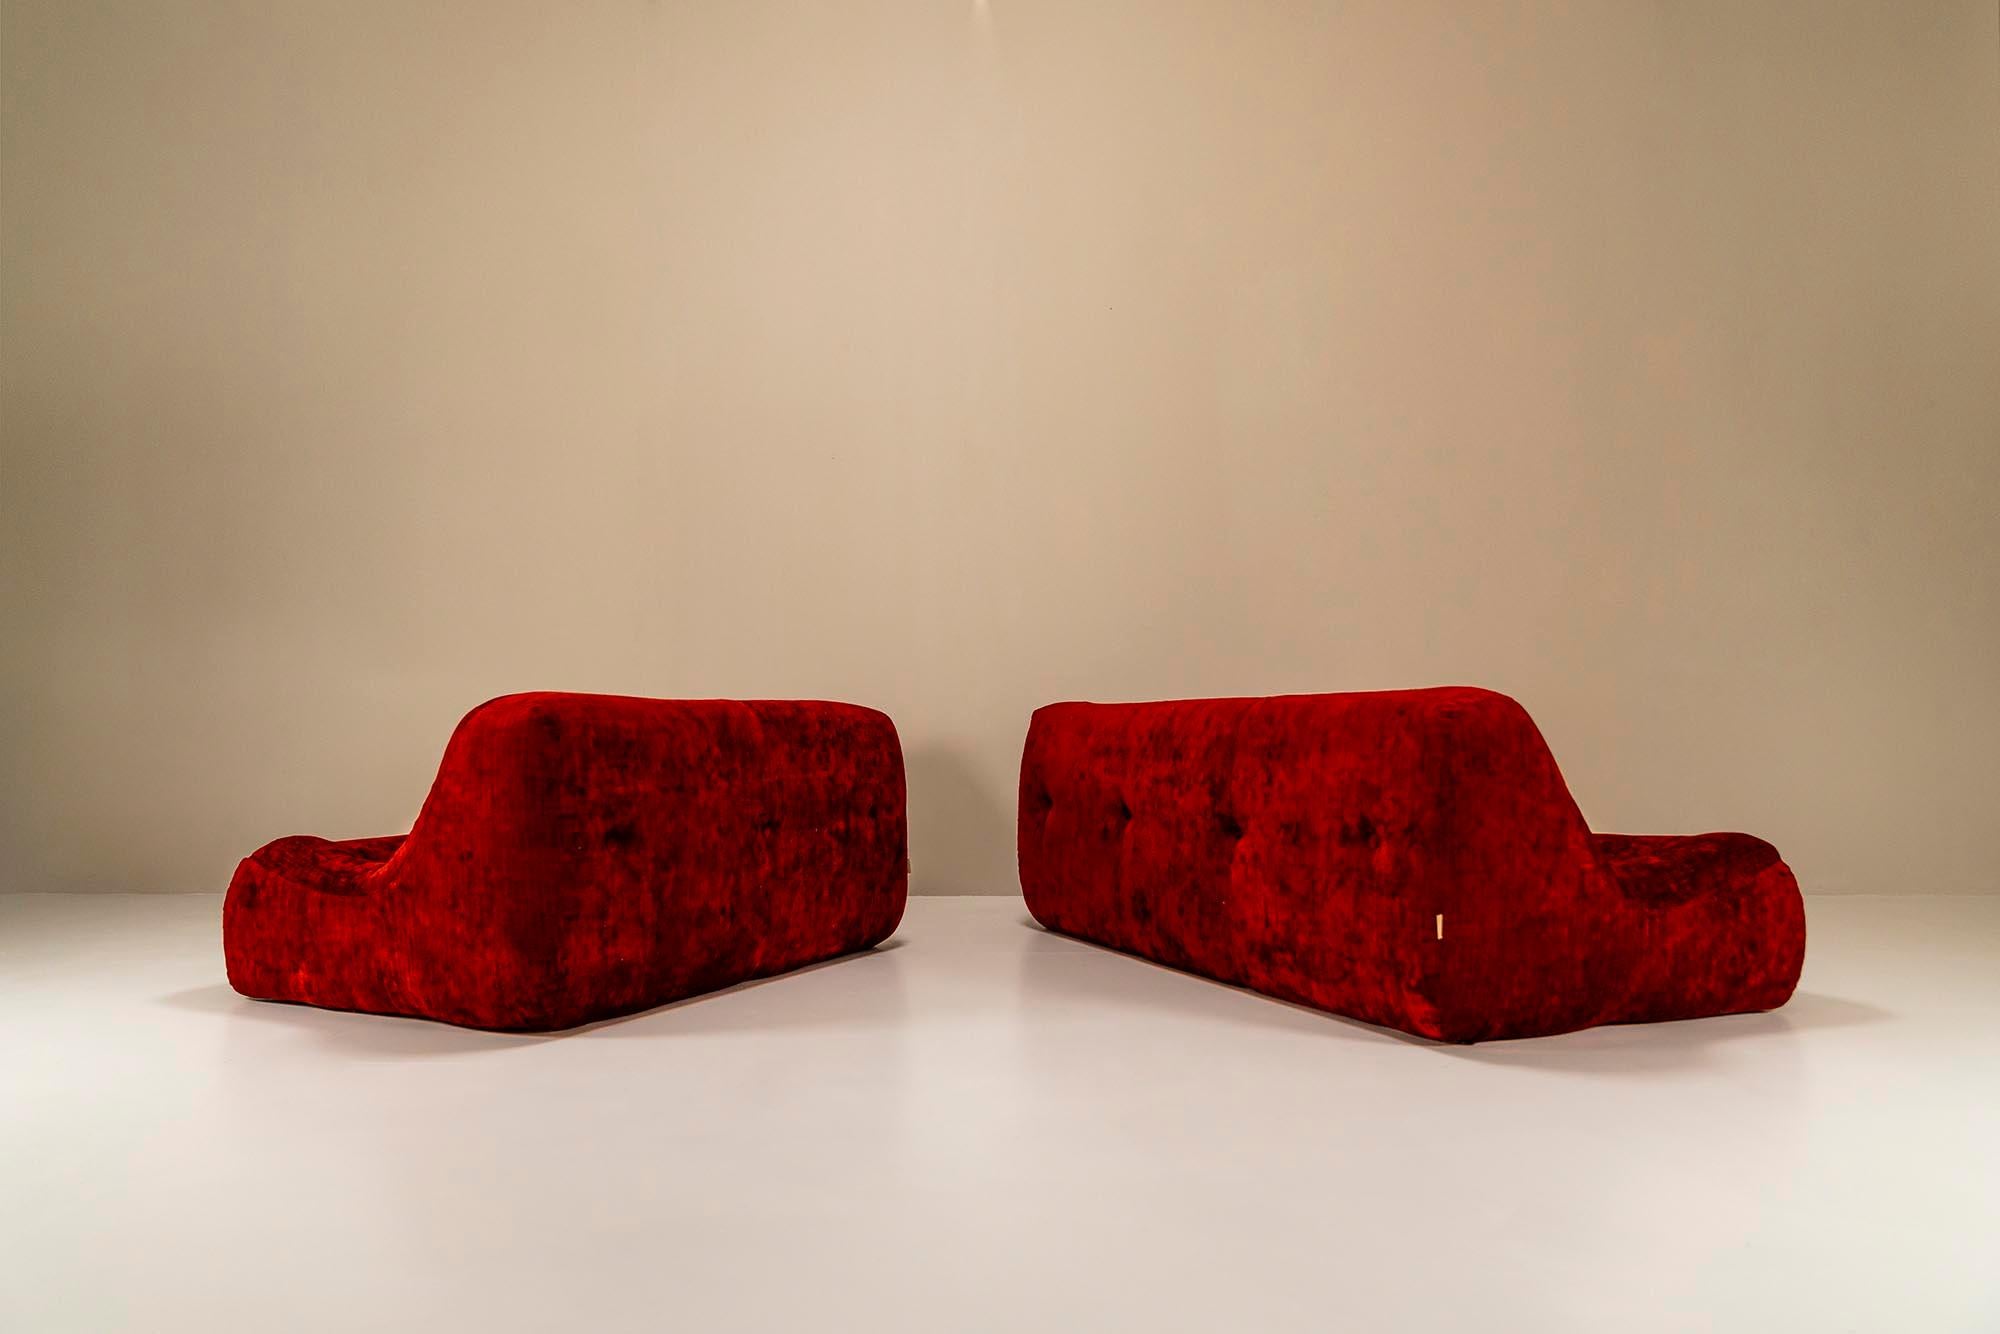 Three-seater and two-seater model 'Kali' by Michel Ducaroy for Ligne Roset.We know the illustrious designer and integral part of the French label Ligne Roset from the iconic and best-selling Togo line. But a period of five years before the release